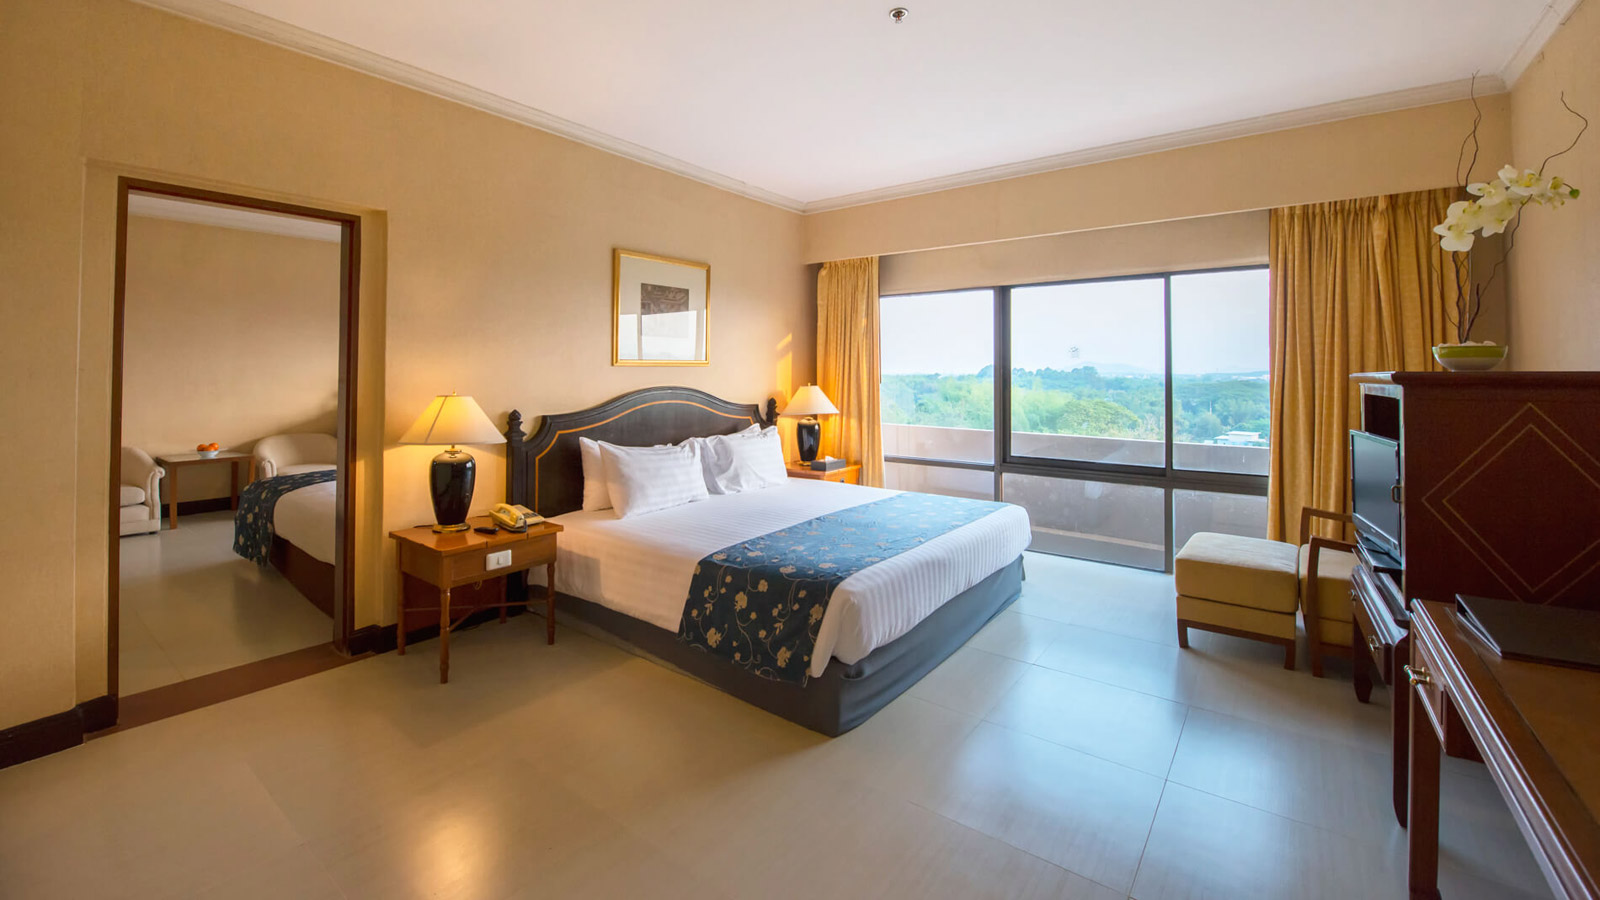 Two Bedroom Family Suites at Loei Palace Hotel - Loei Palace Hotel